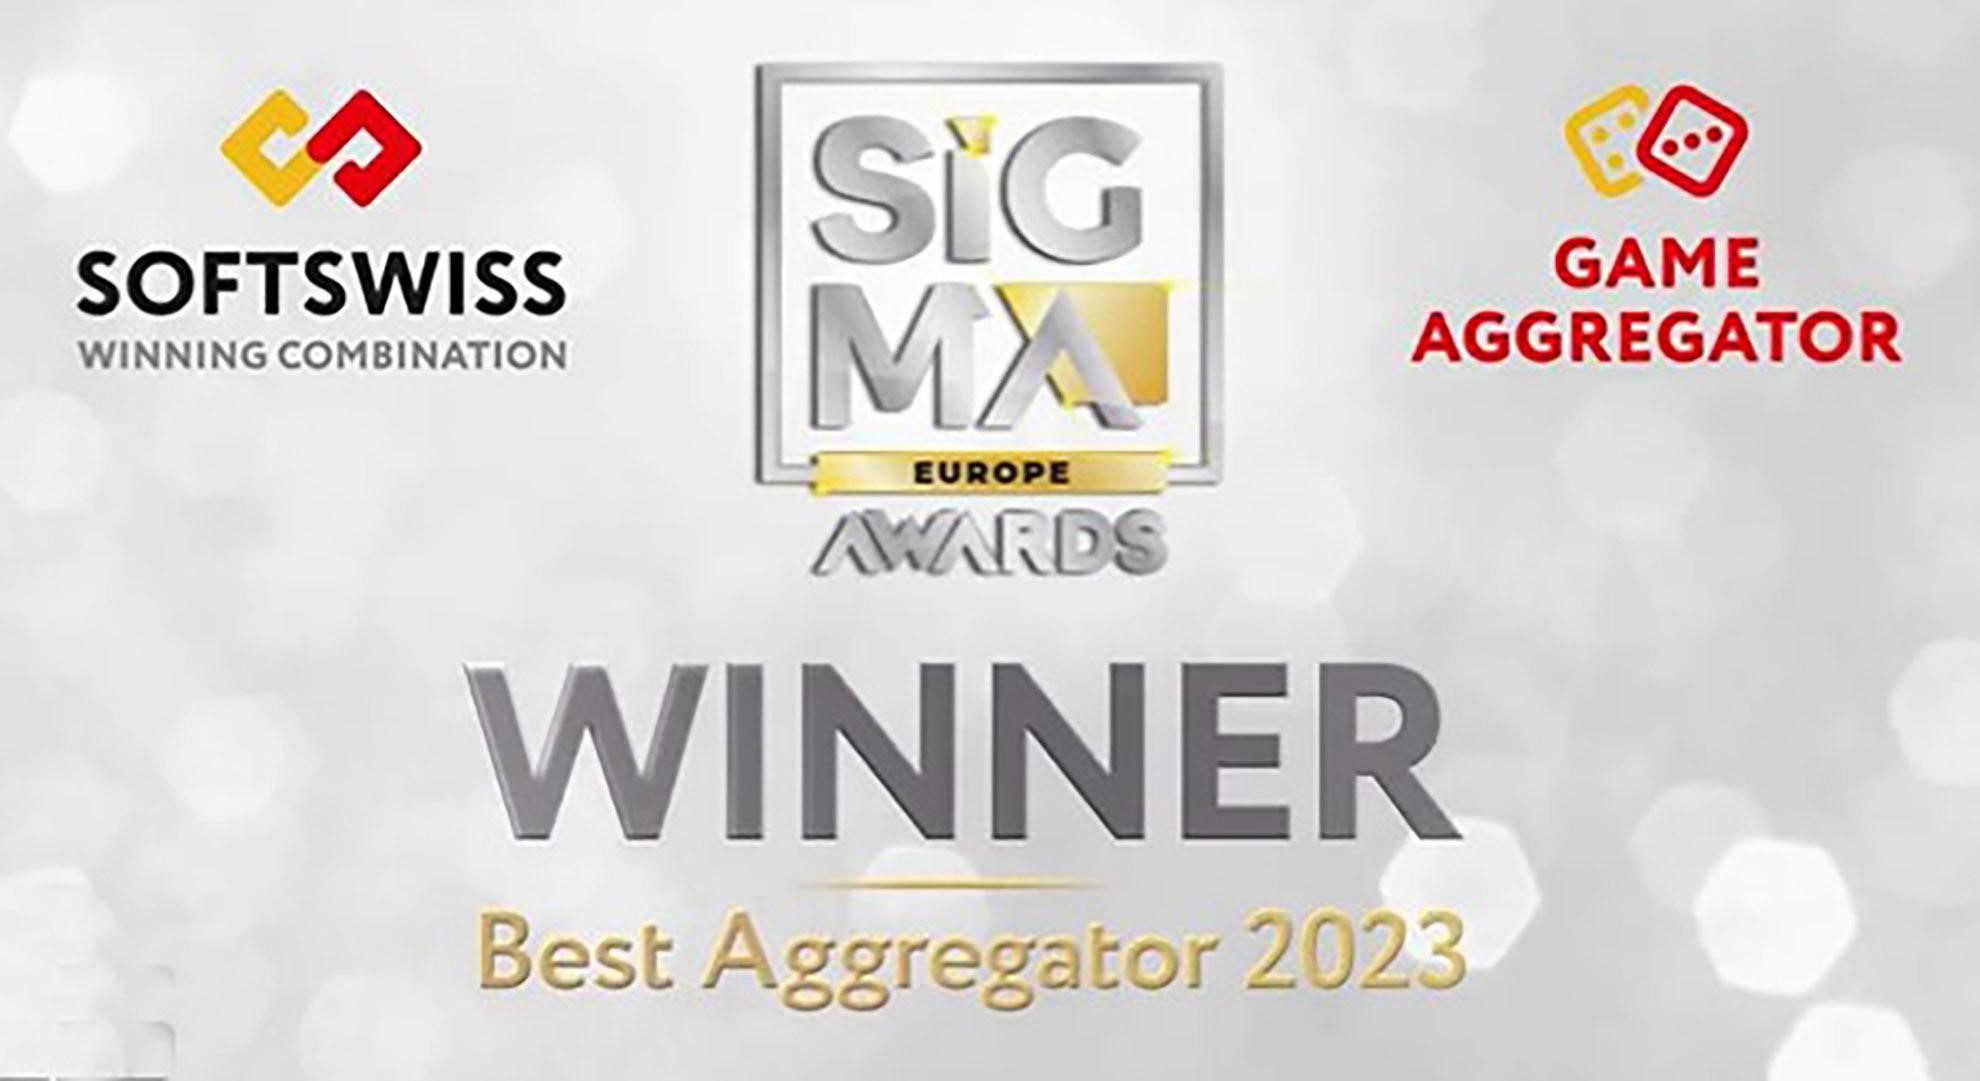 Image from Sigma Awards 2023